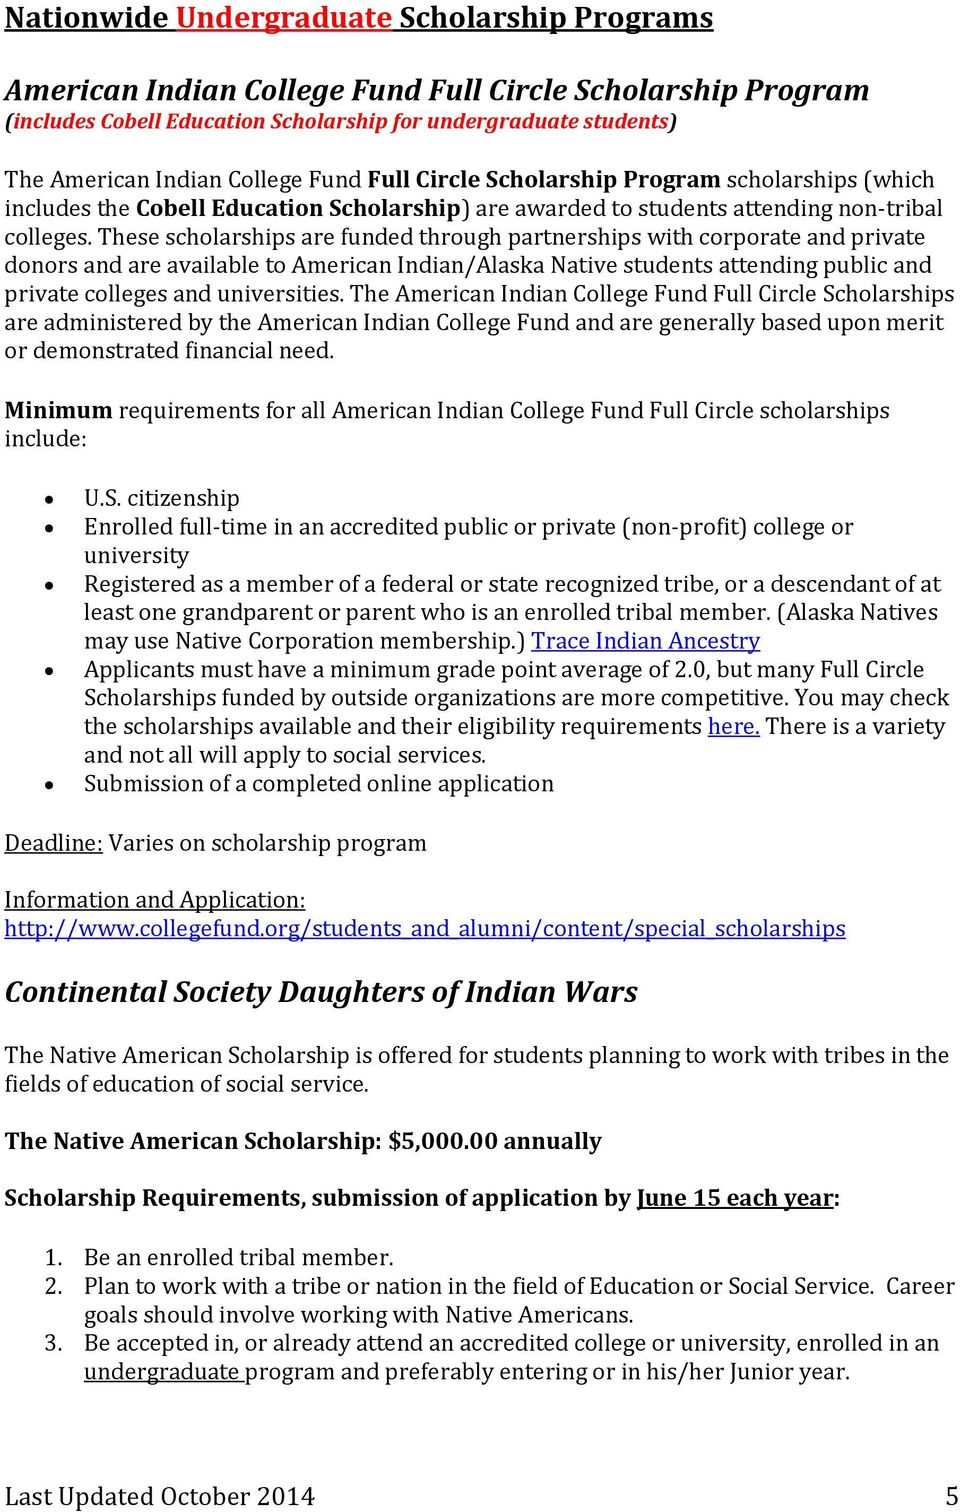 These scholarships are funded through partnerships with corporate and private donors and are available to American Indian/Alaska Native students attending public and private colleges and universities.